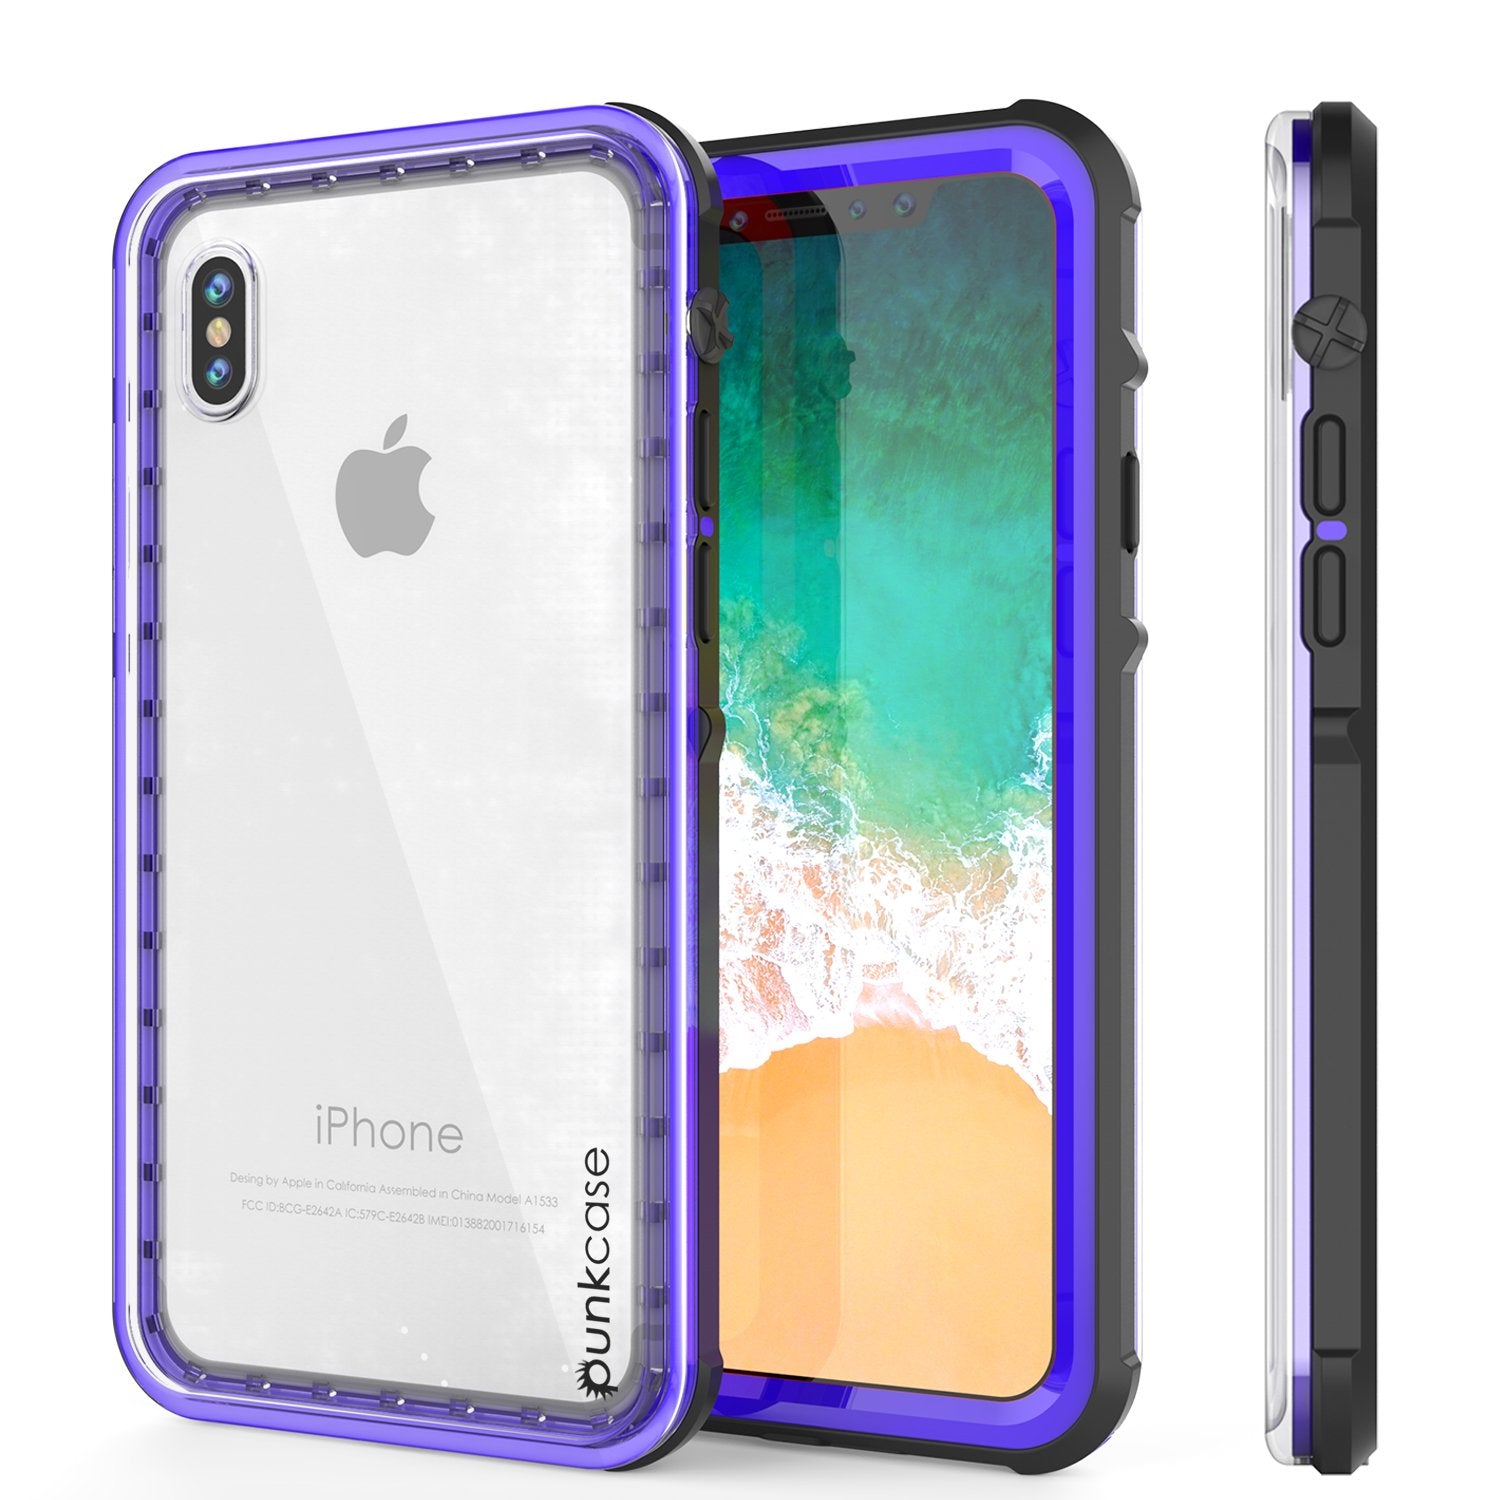 iPhone X Case, PUNKCase [CRYSTAL SERIES] Protective IP68 Certified Cover [Purple]